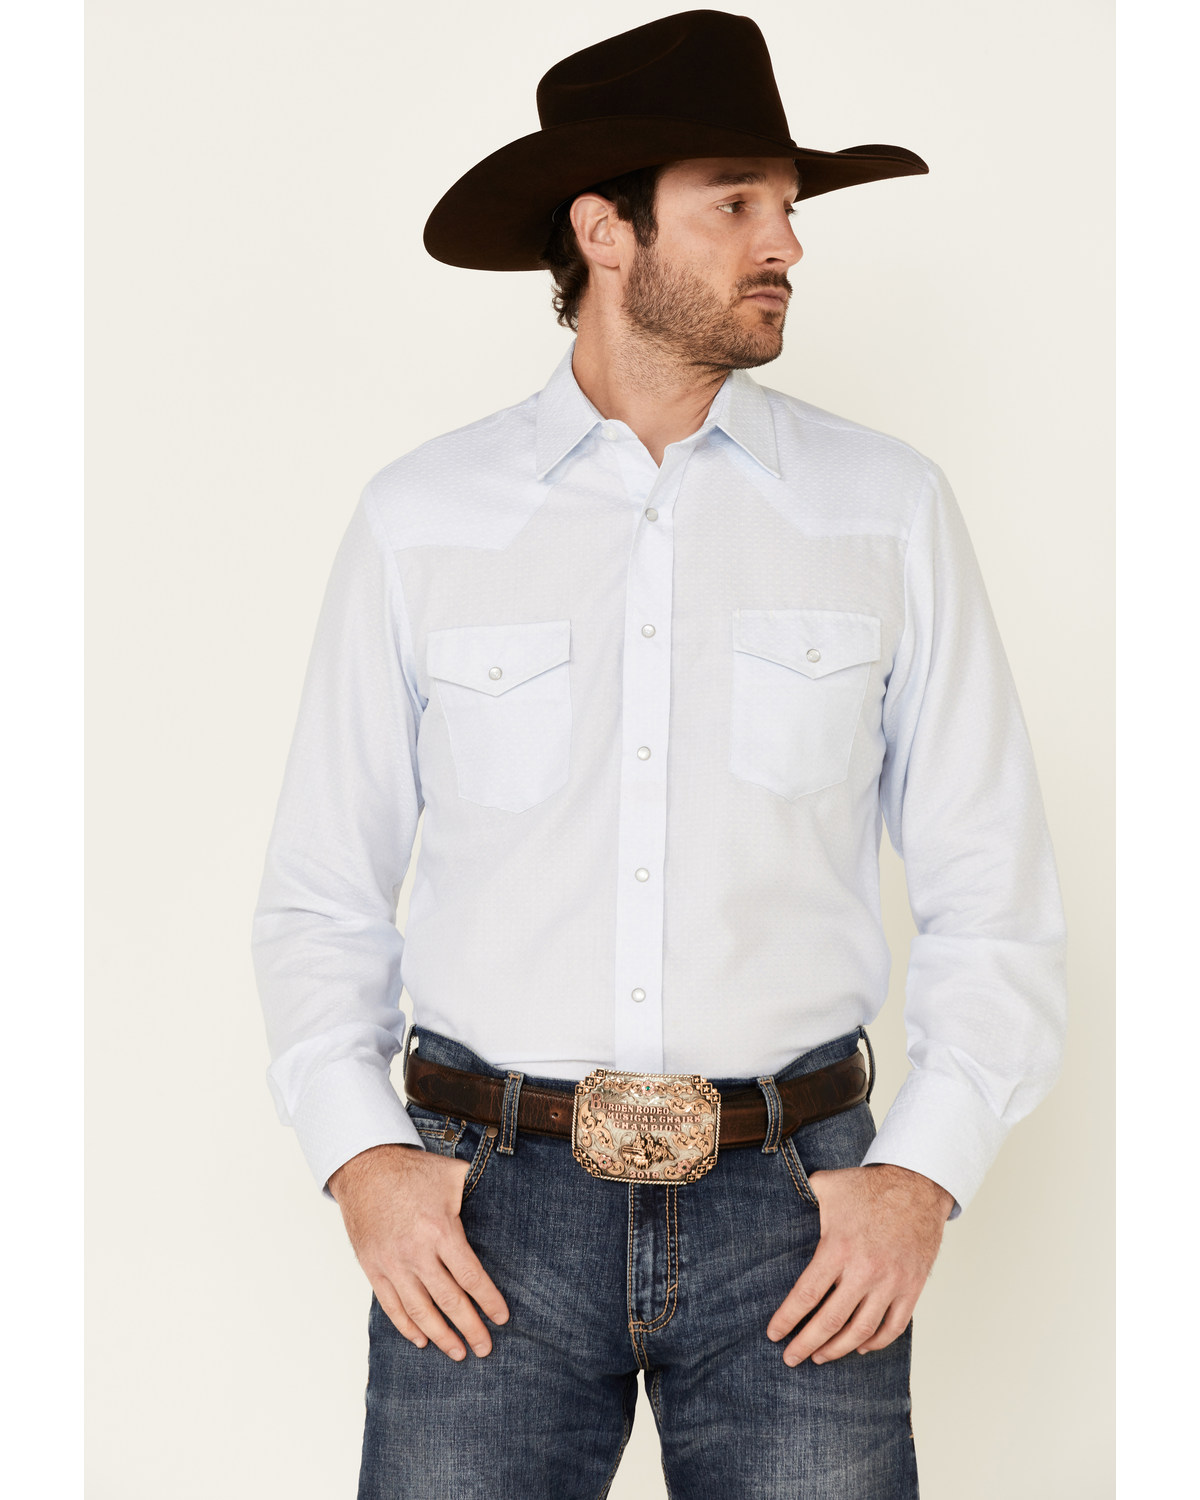 Roper Men's Classic Tone On Solid Long Sleeve Pearl Snap Western Shirt